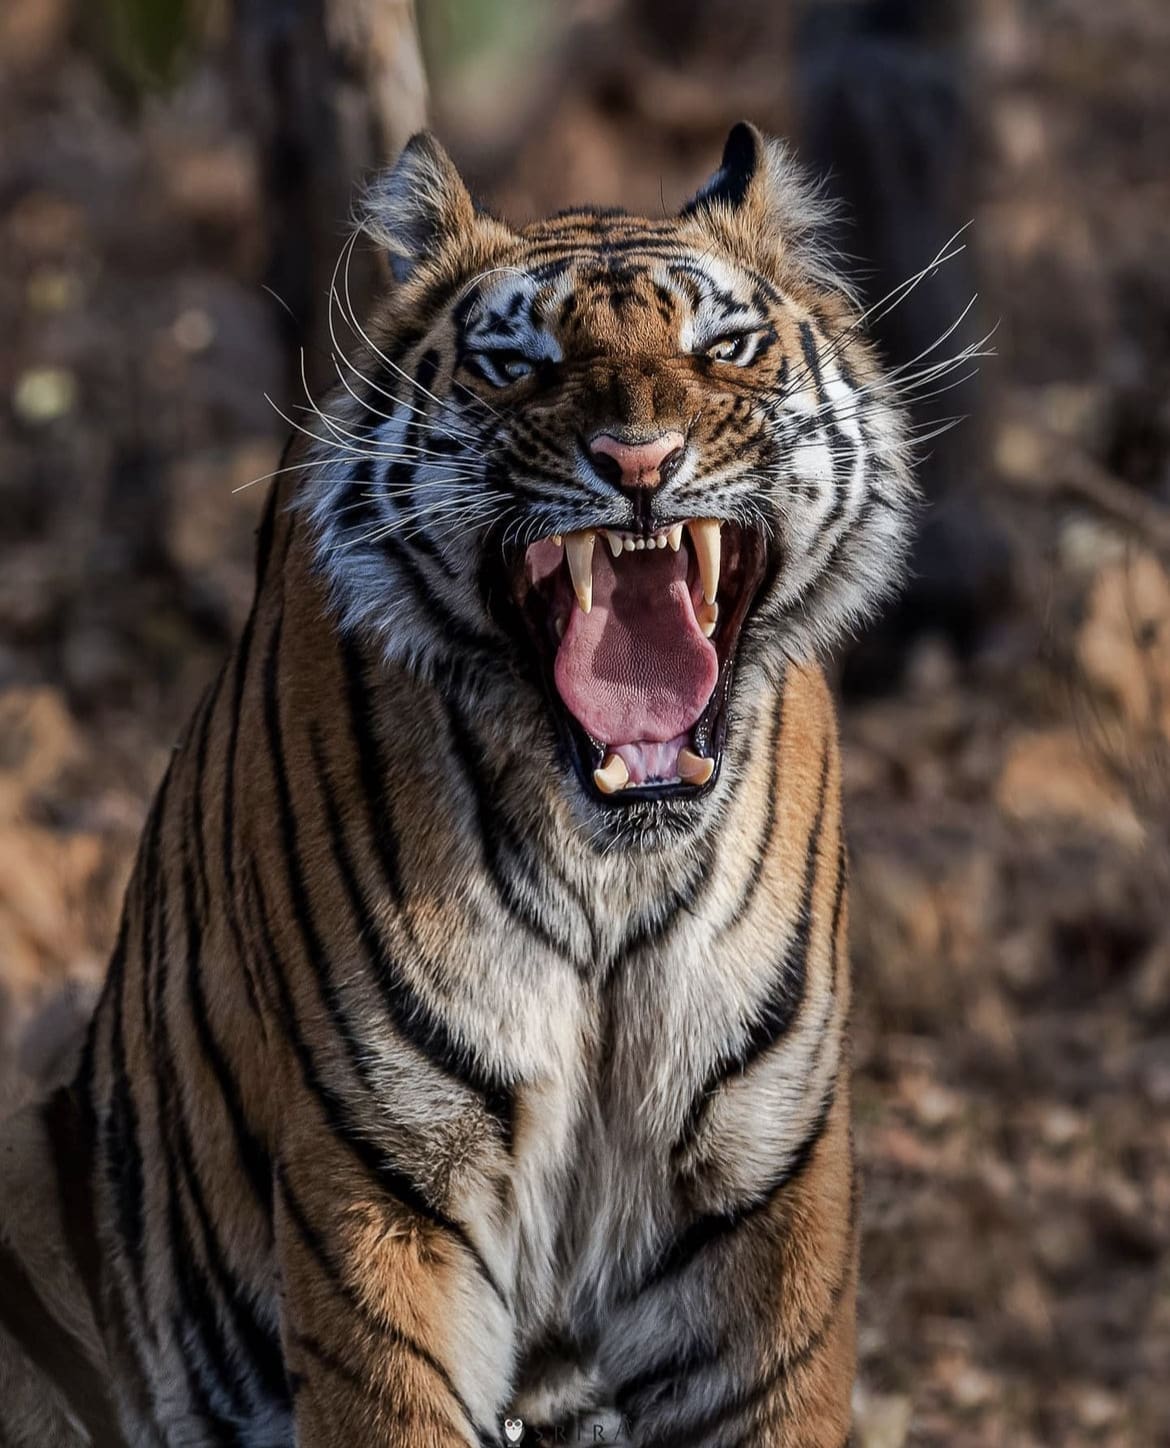 Bengal tiger showing off it's impressive teeth while yawning